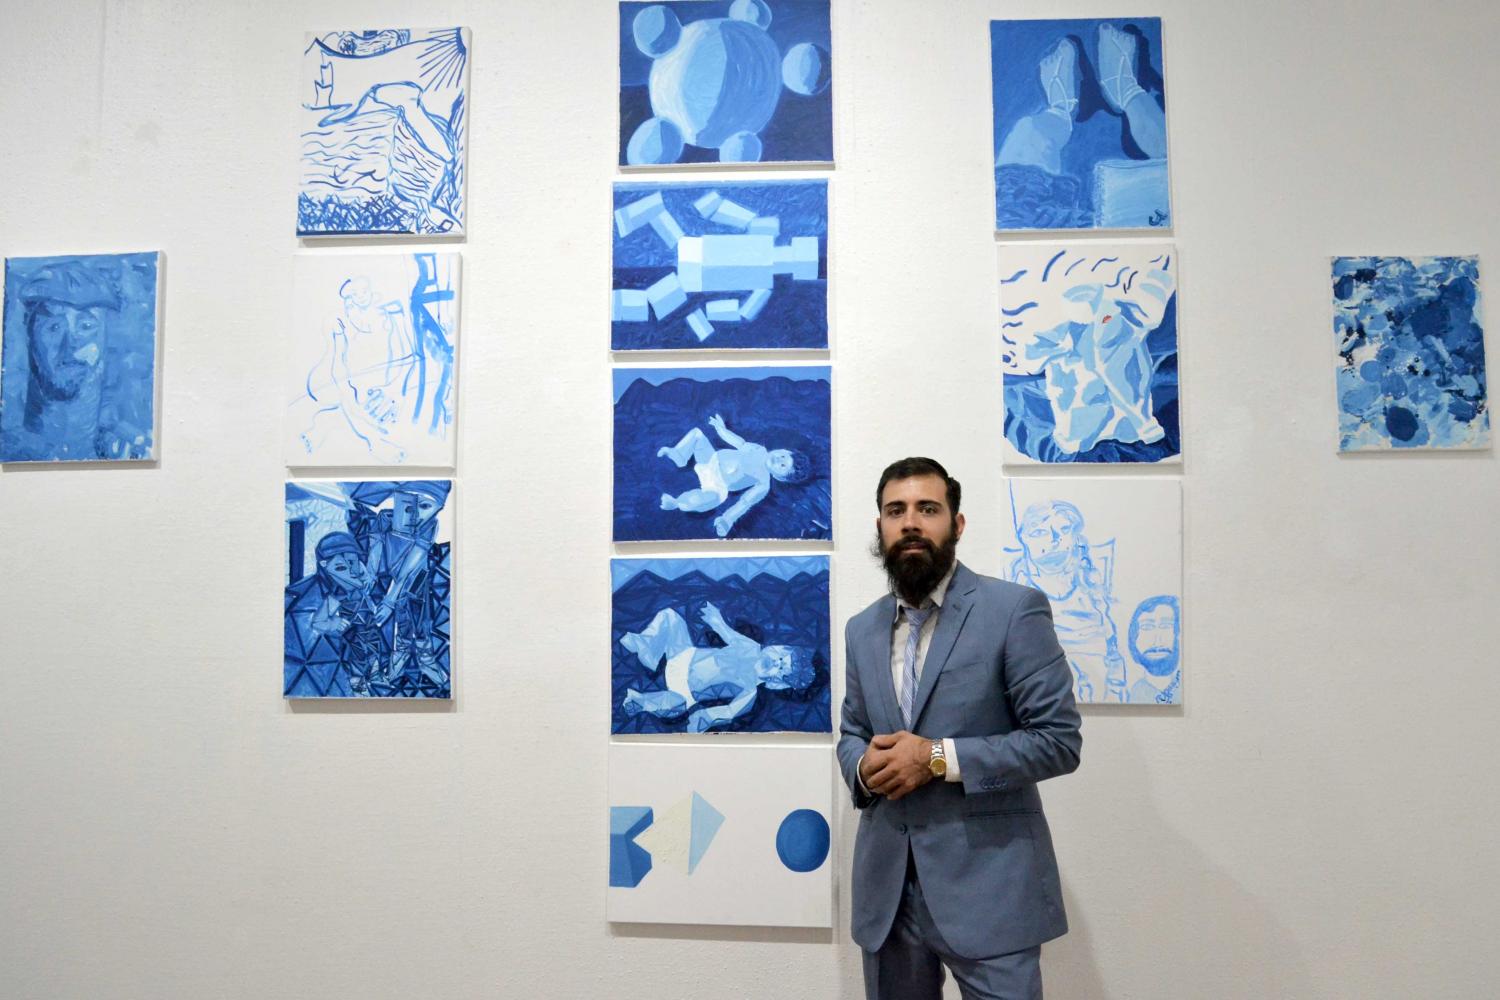 Jorge Alfonso Polanco Aguirre  posing with his paintings at the opening of the exhibit “ The life of J’ on August 5th at the International Museum of Art.